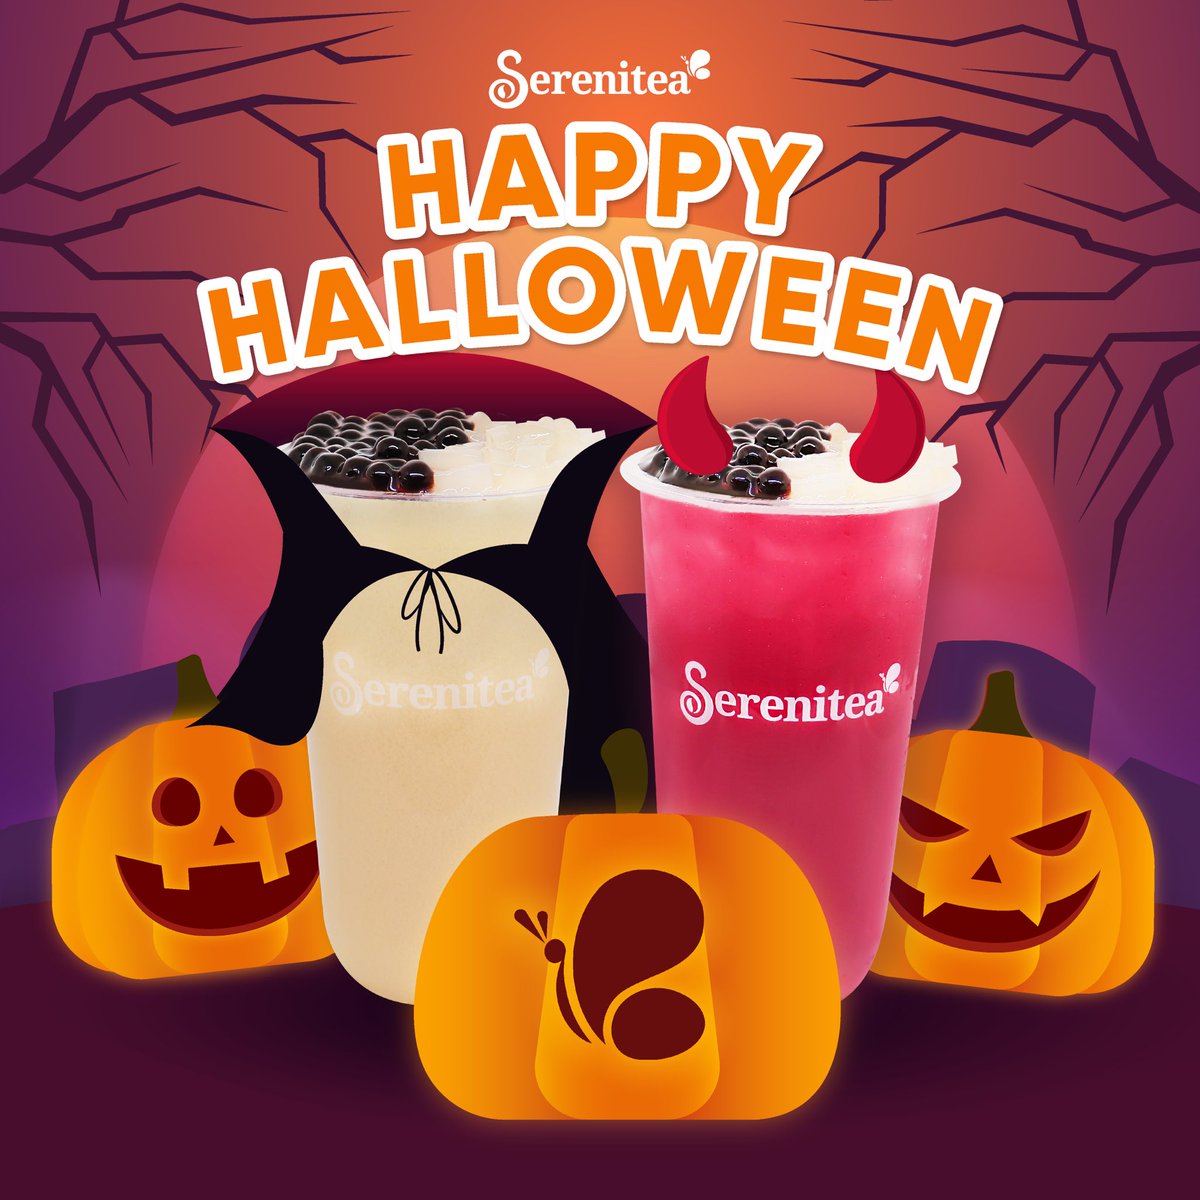 No tricks, here: We hope you have a sweet and happy Halloween, Serenitea lovers 🎃🕸️🧡